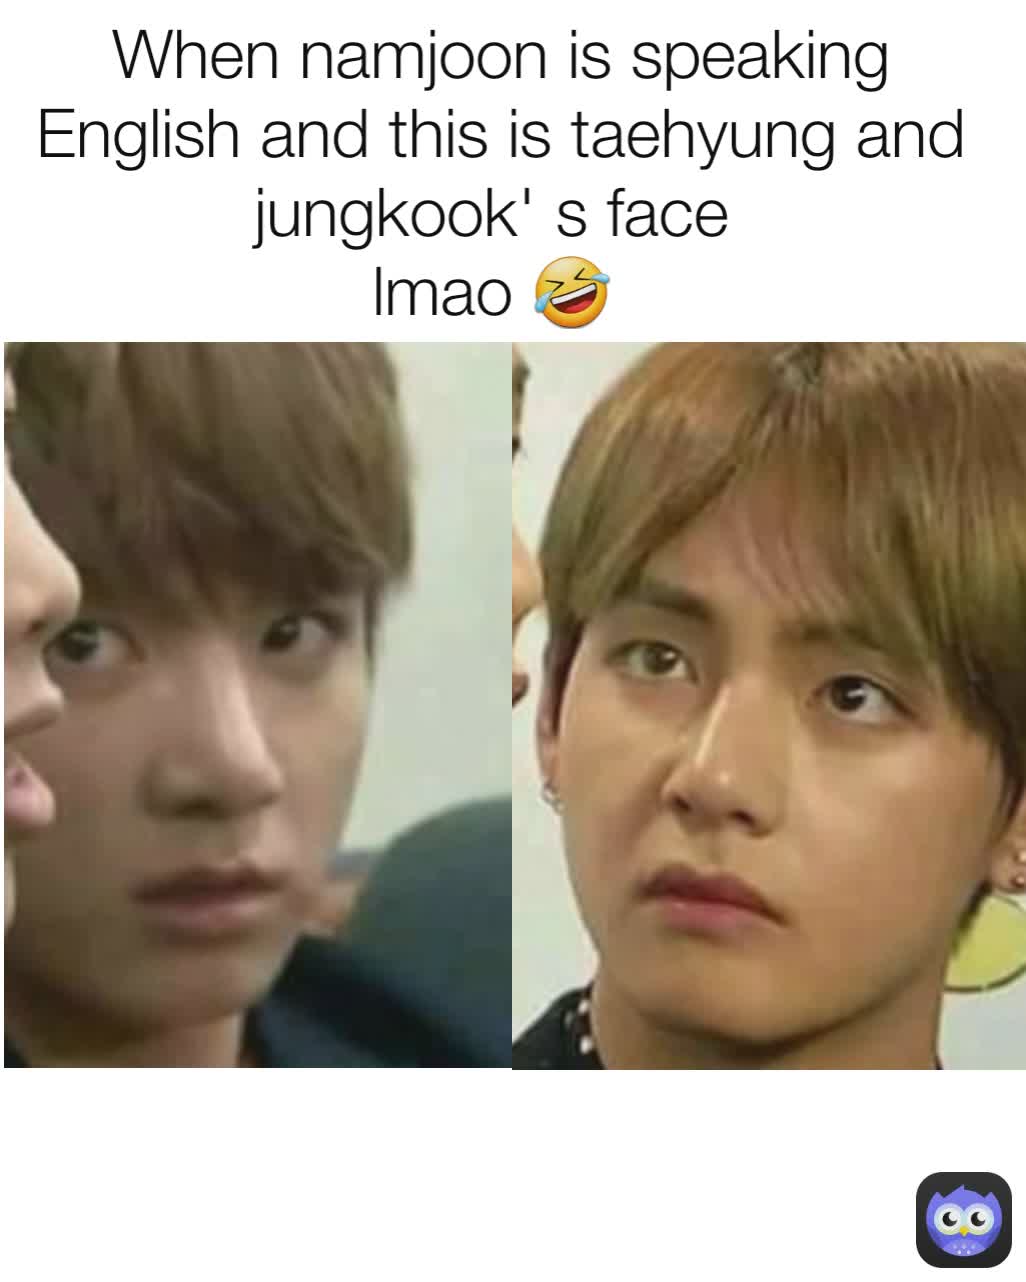 When namjoon is speaking English and this is taehyung and jungkook' s face 
lmao 🤣 